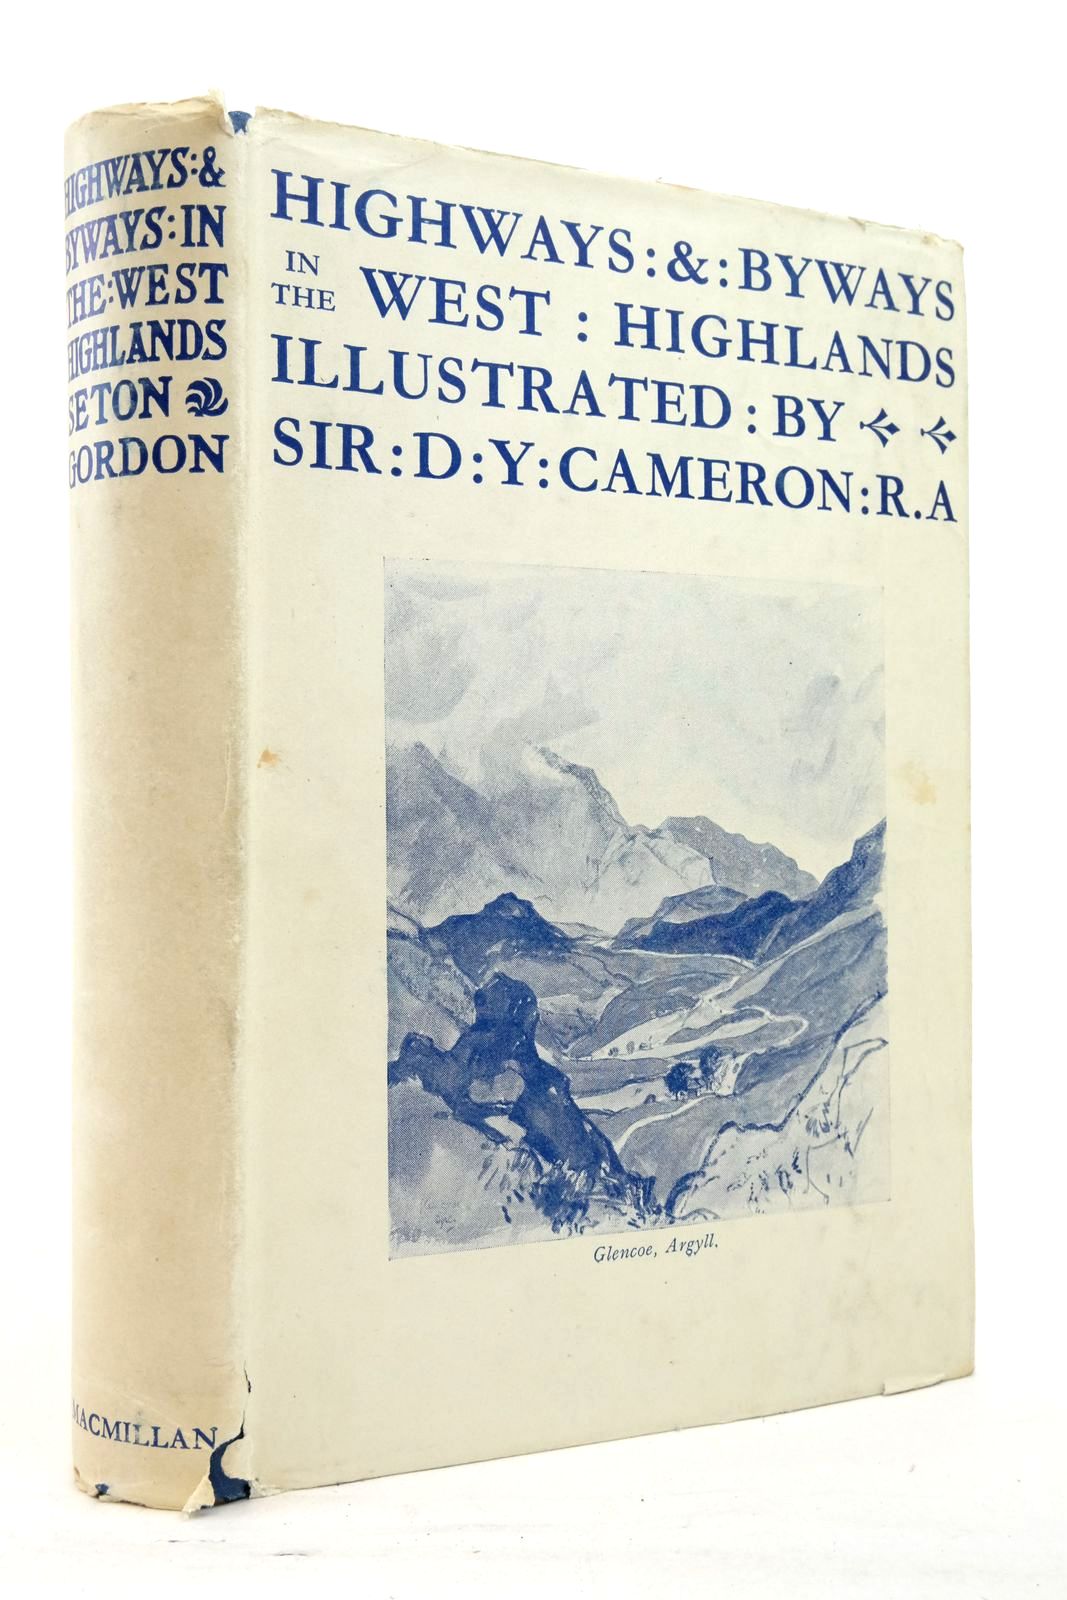 Photo of HIGHWAYS AND BYWAYS IN THE WEST HIGHLANDS written by Gordon, Seton illustrated by Cameron, D.Y. published by Macmillan & Co. Ltd. (STOCK CODE: 2137634)  for sale by Stella & Rose's Books